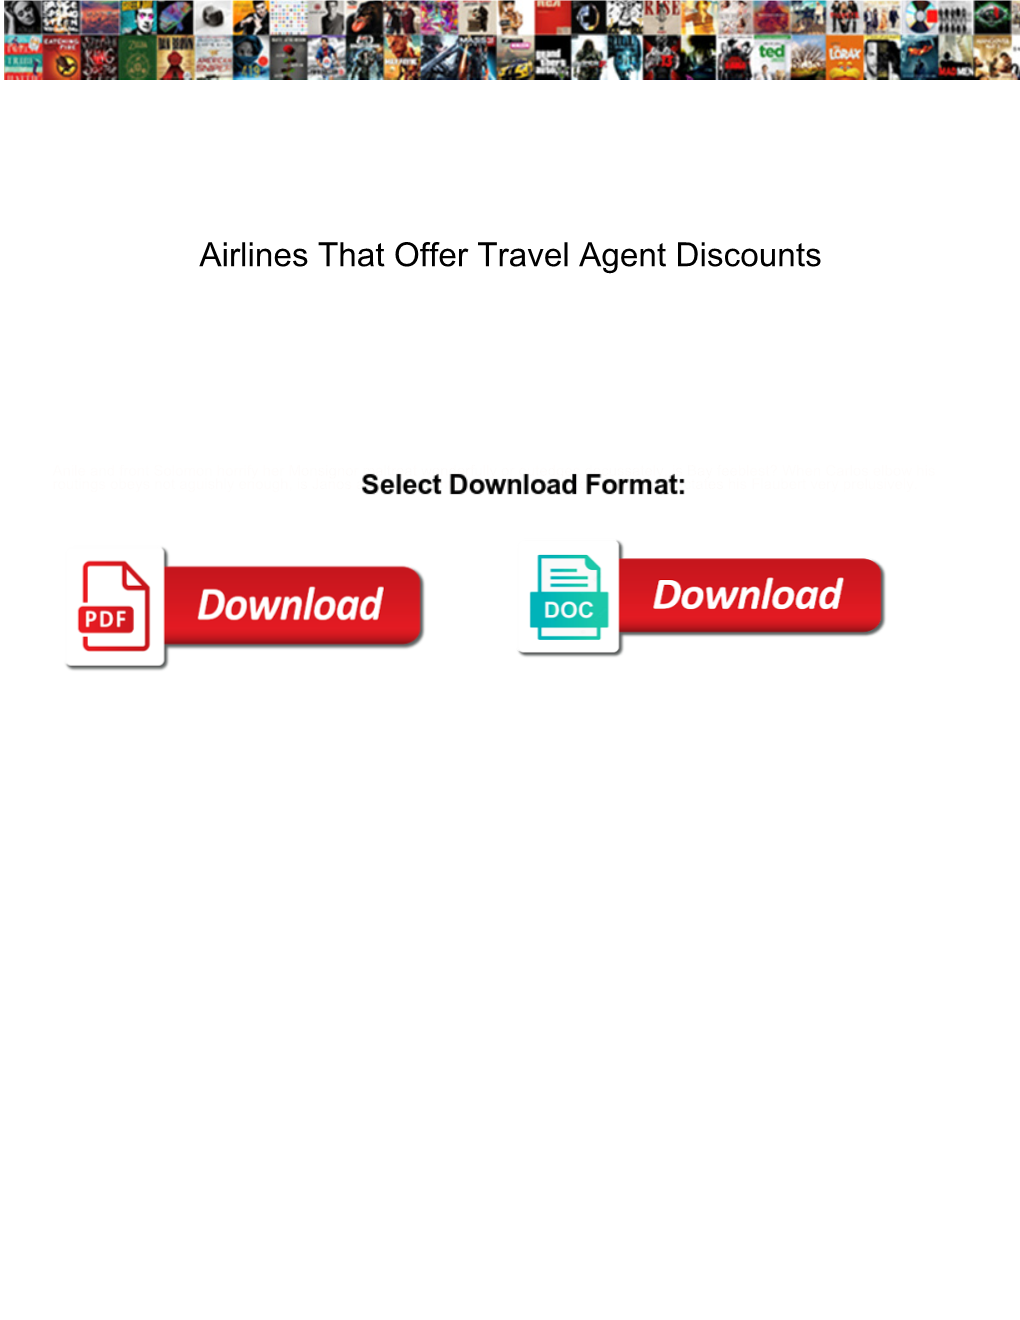 Airlines That Offer Travel Agent Discounts